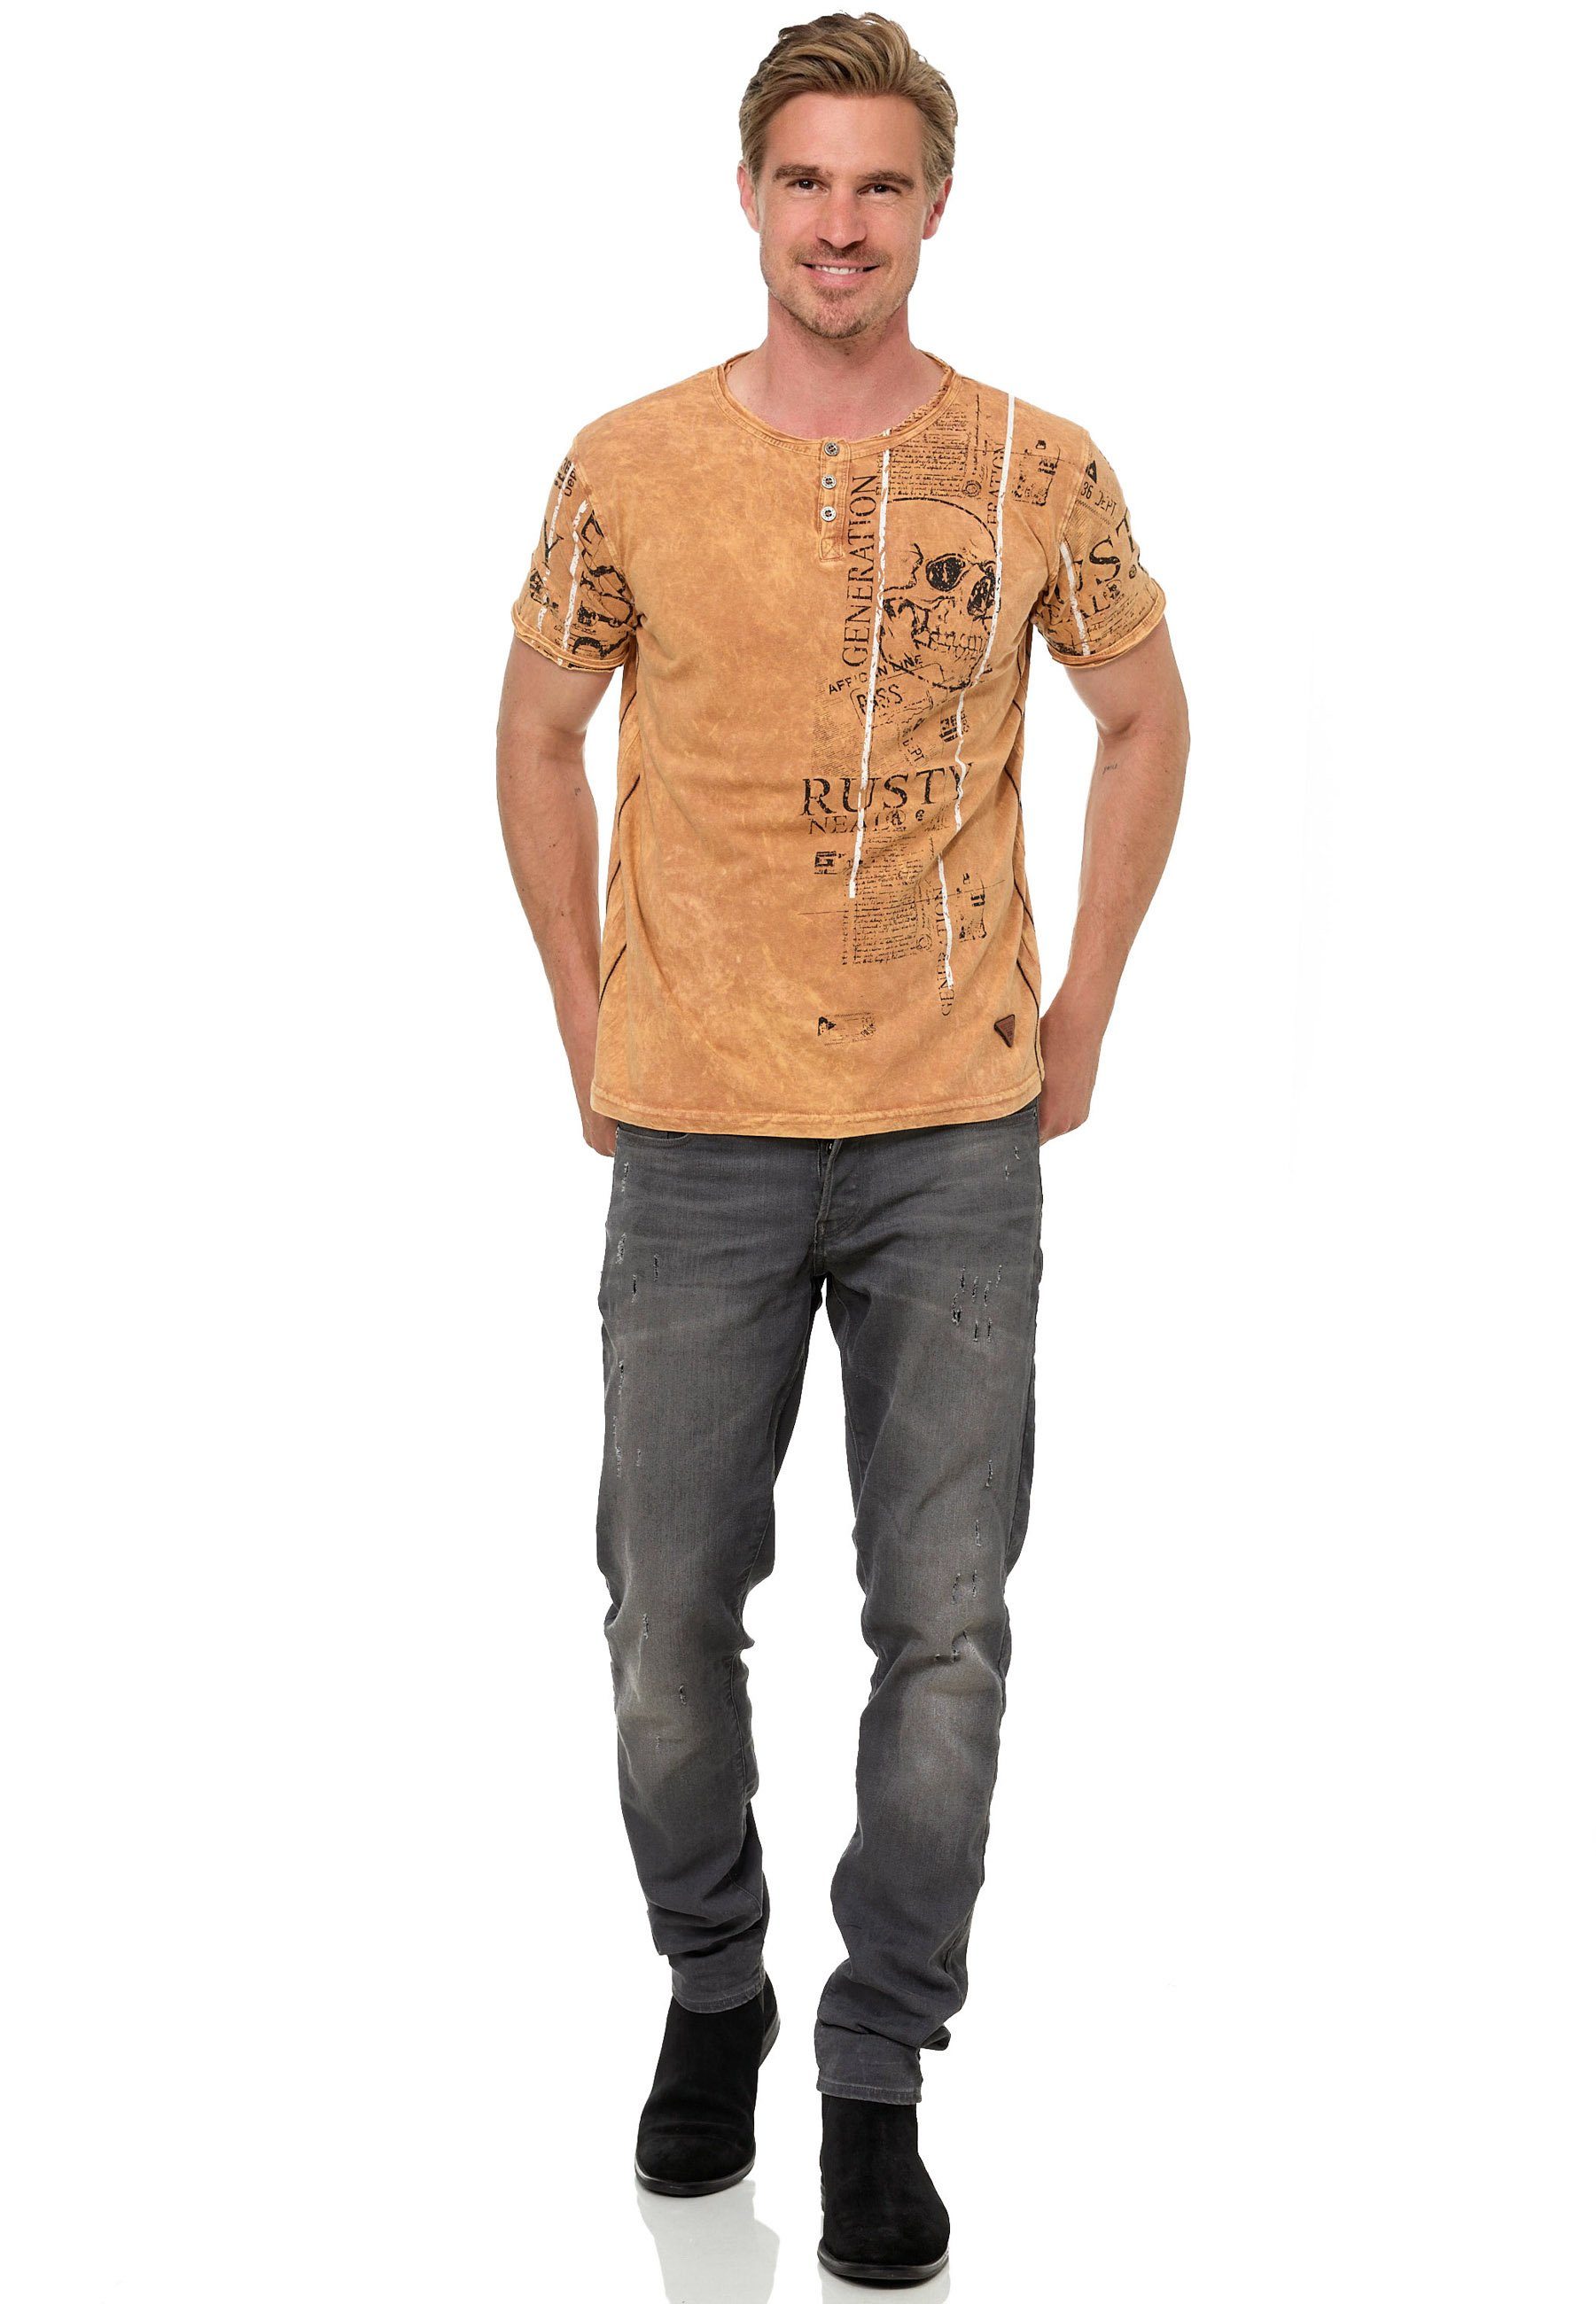 Rusty Neal T-Shirt im Used-Look Allover-Print mit camelfarben